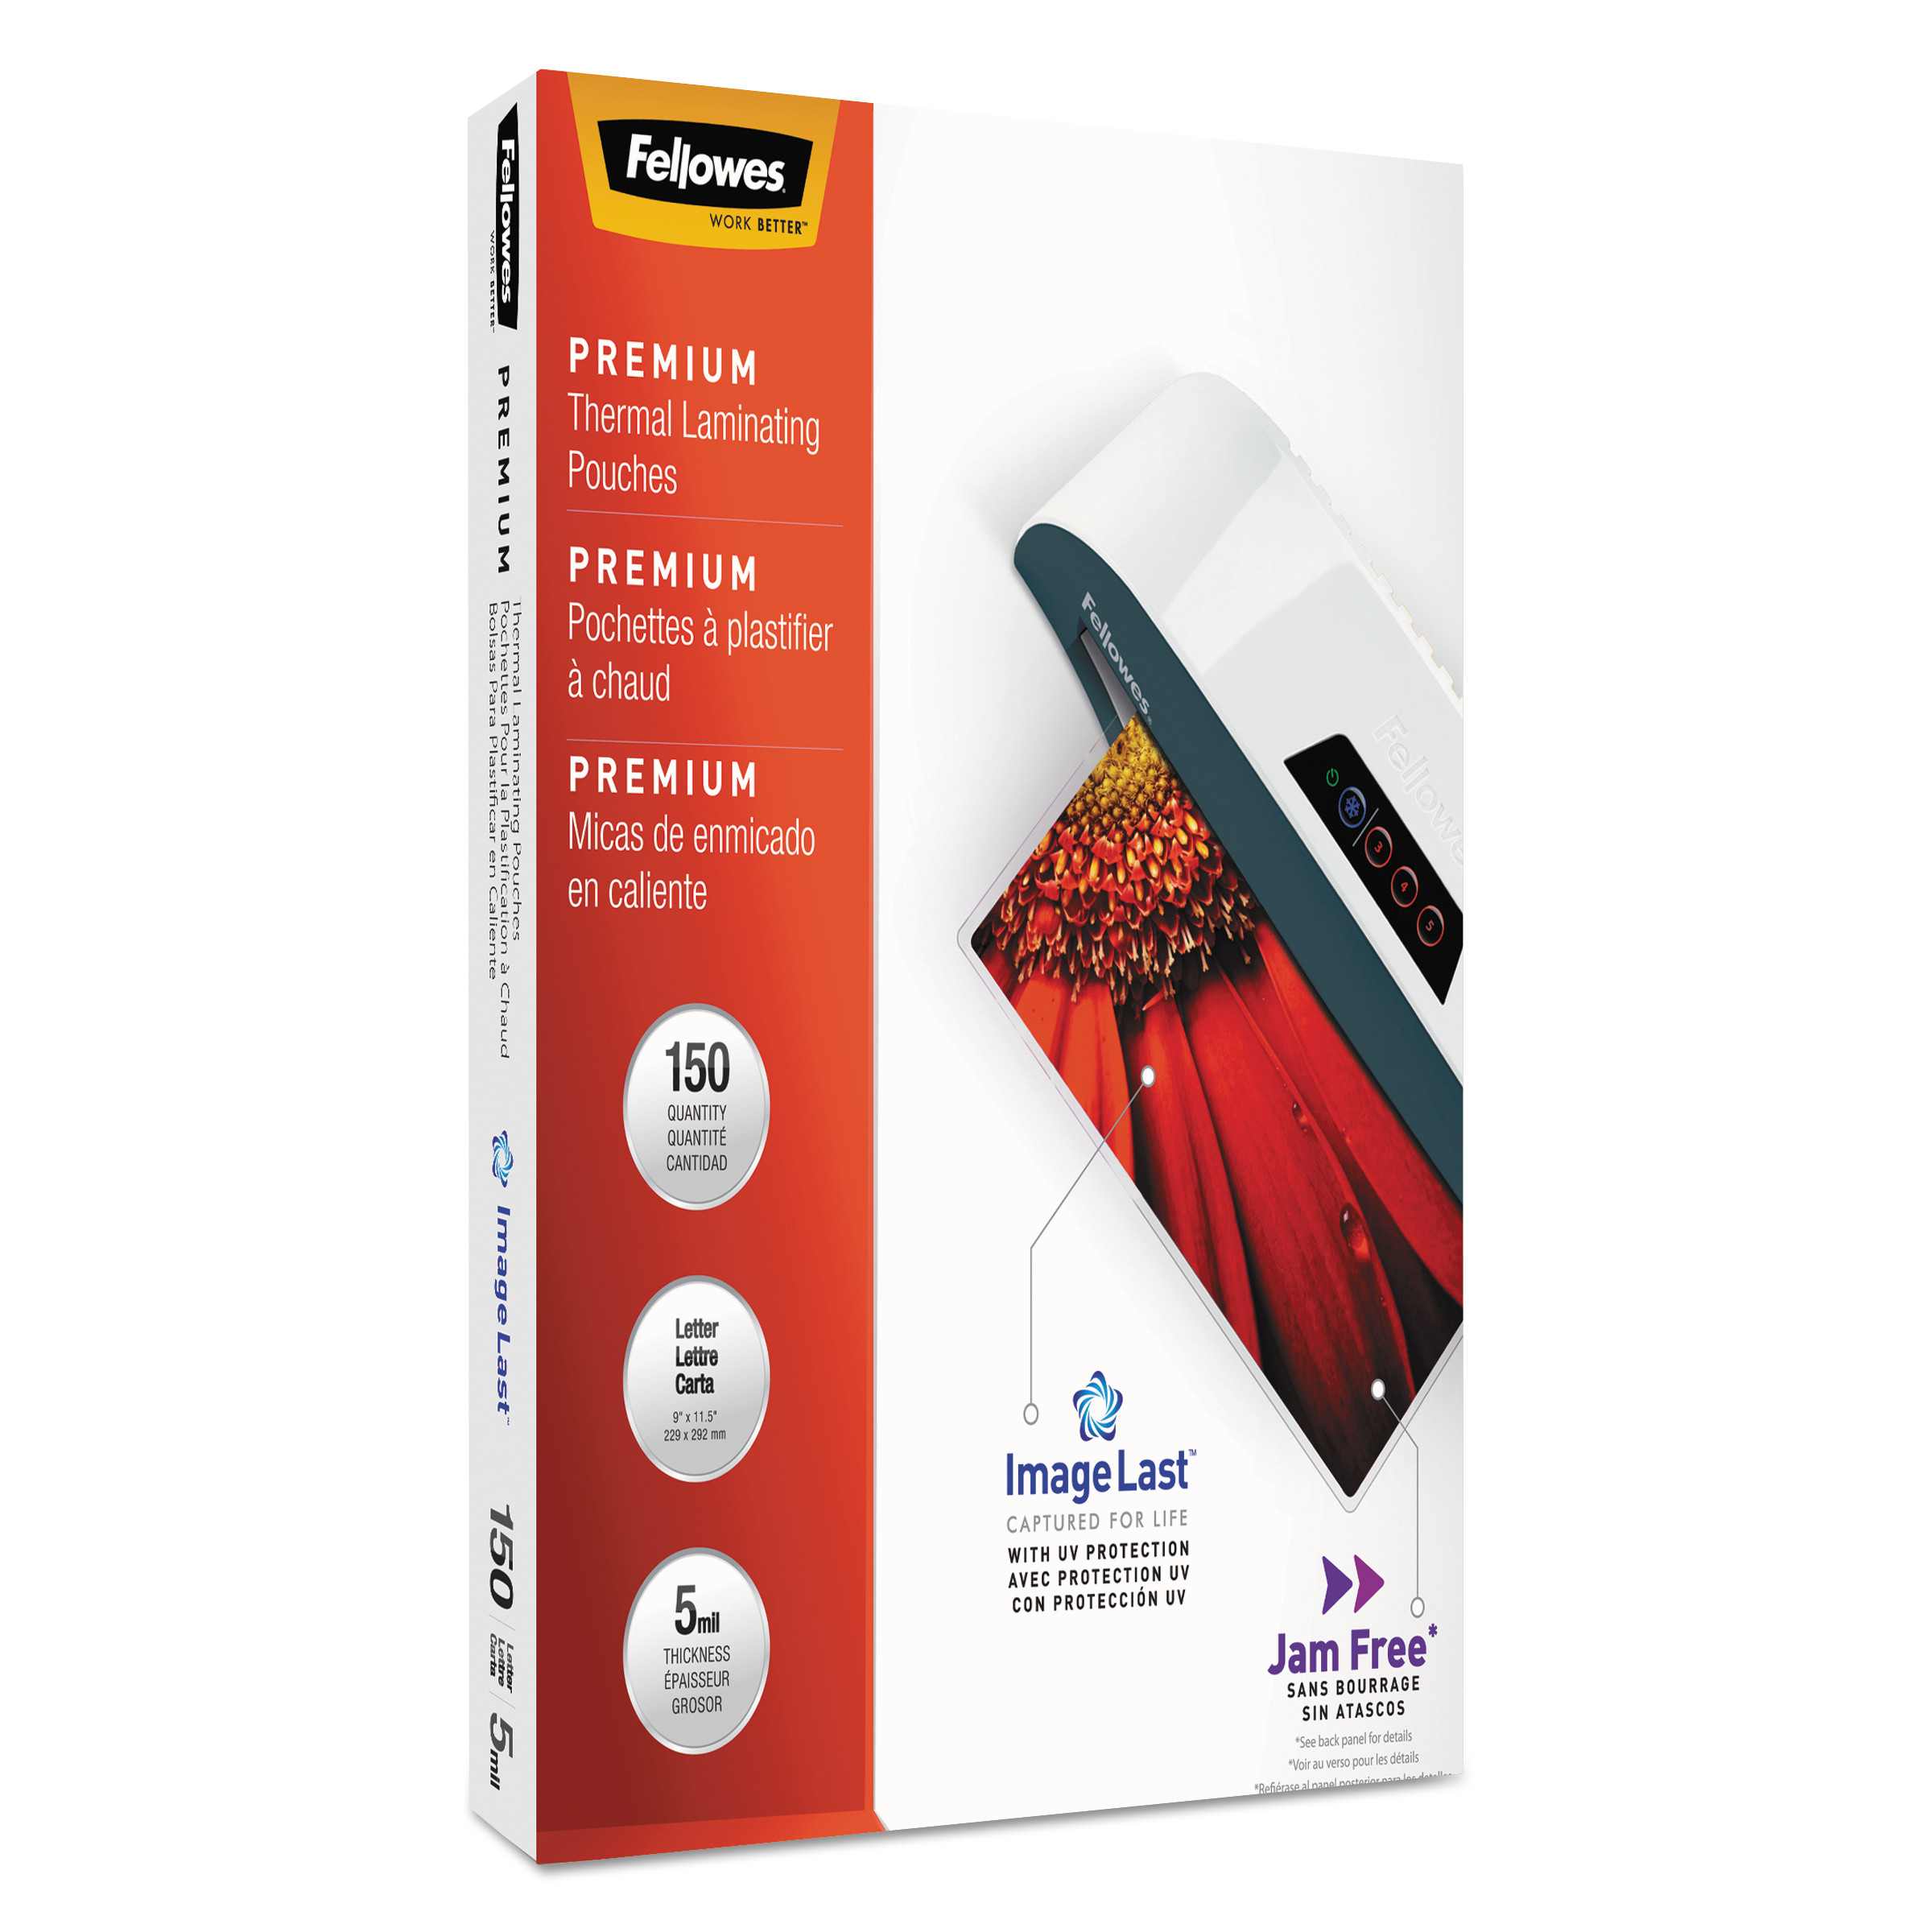  Fellowes 5204007 ImageLast Laminating Pouches with UV Protection, 5 mil, 9 x 11.5, Clear, 150/Pack (FEL5204007) 